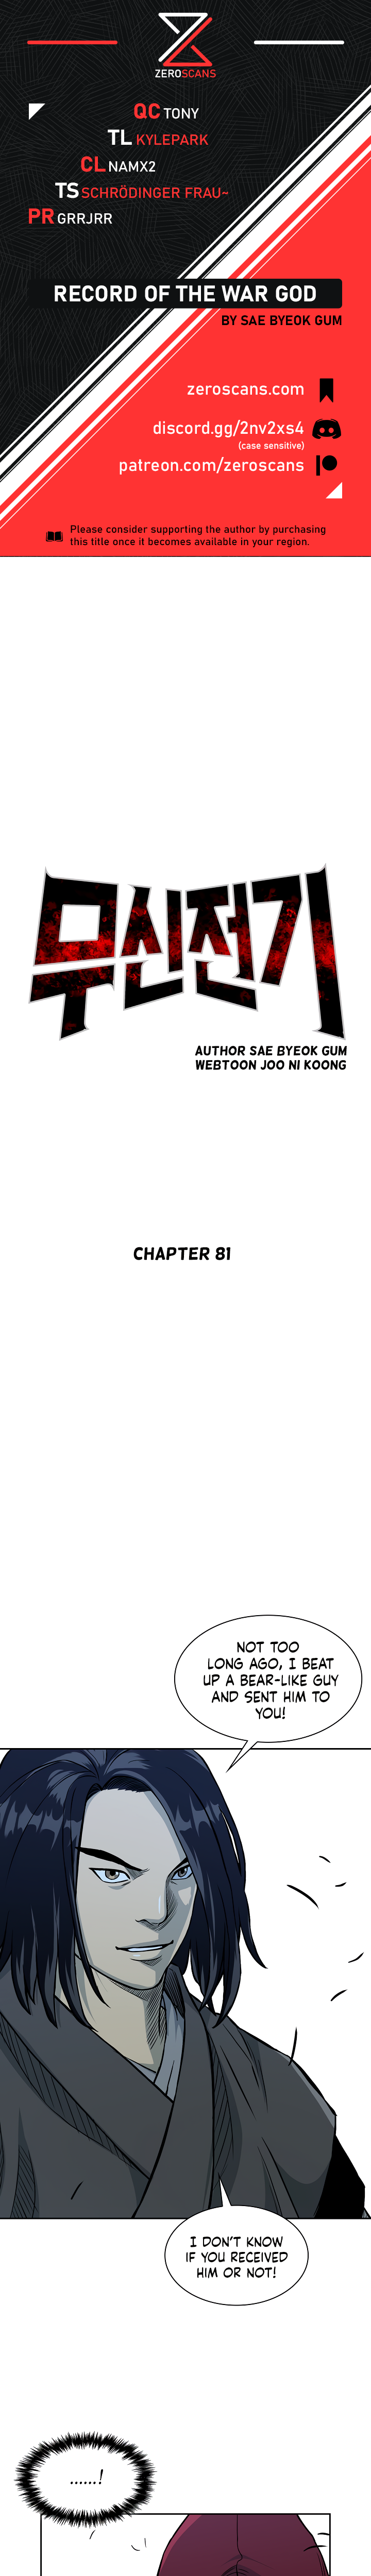 Record of the War God - Chapter 5957 - Image 1